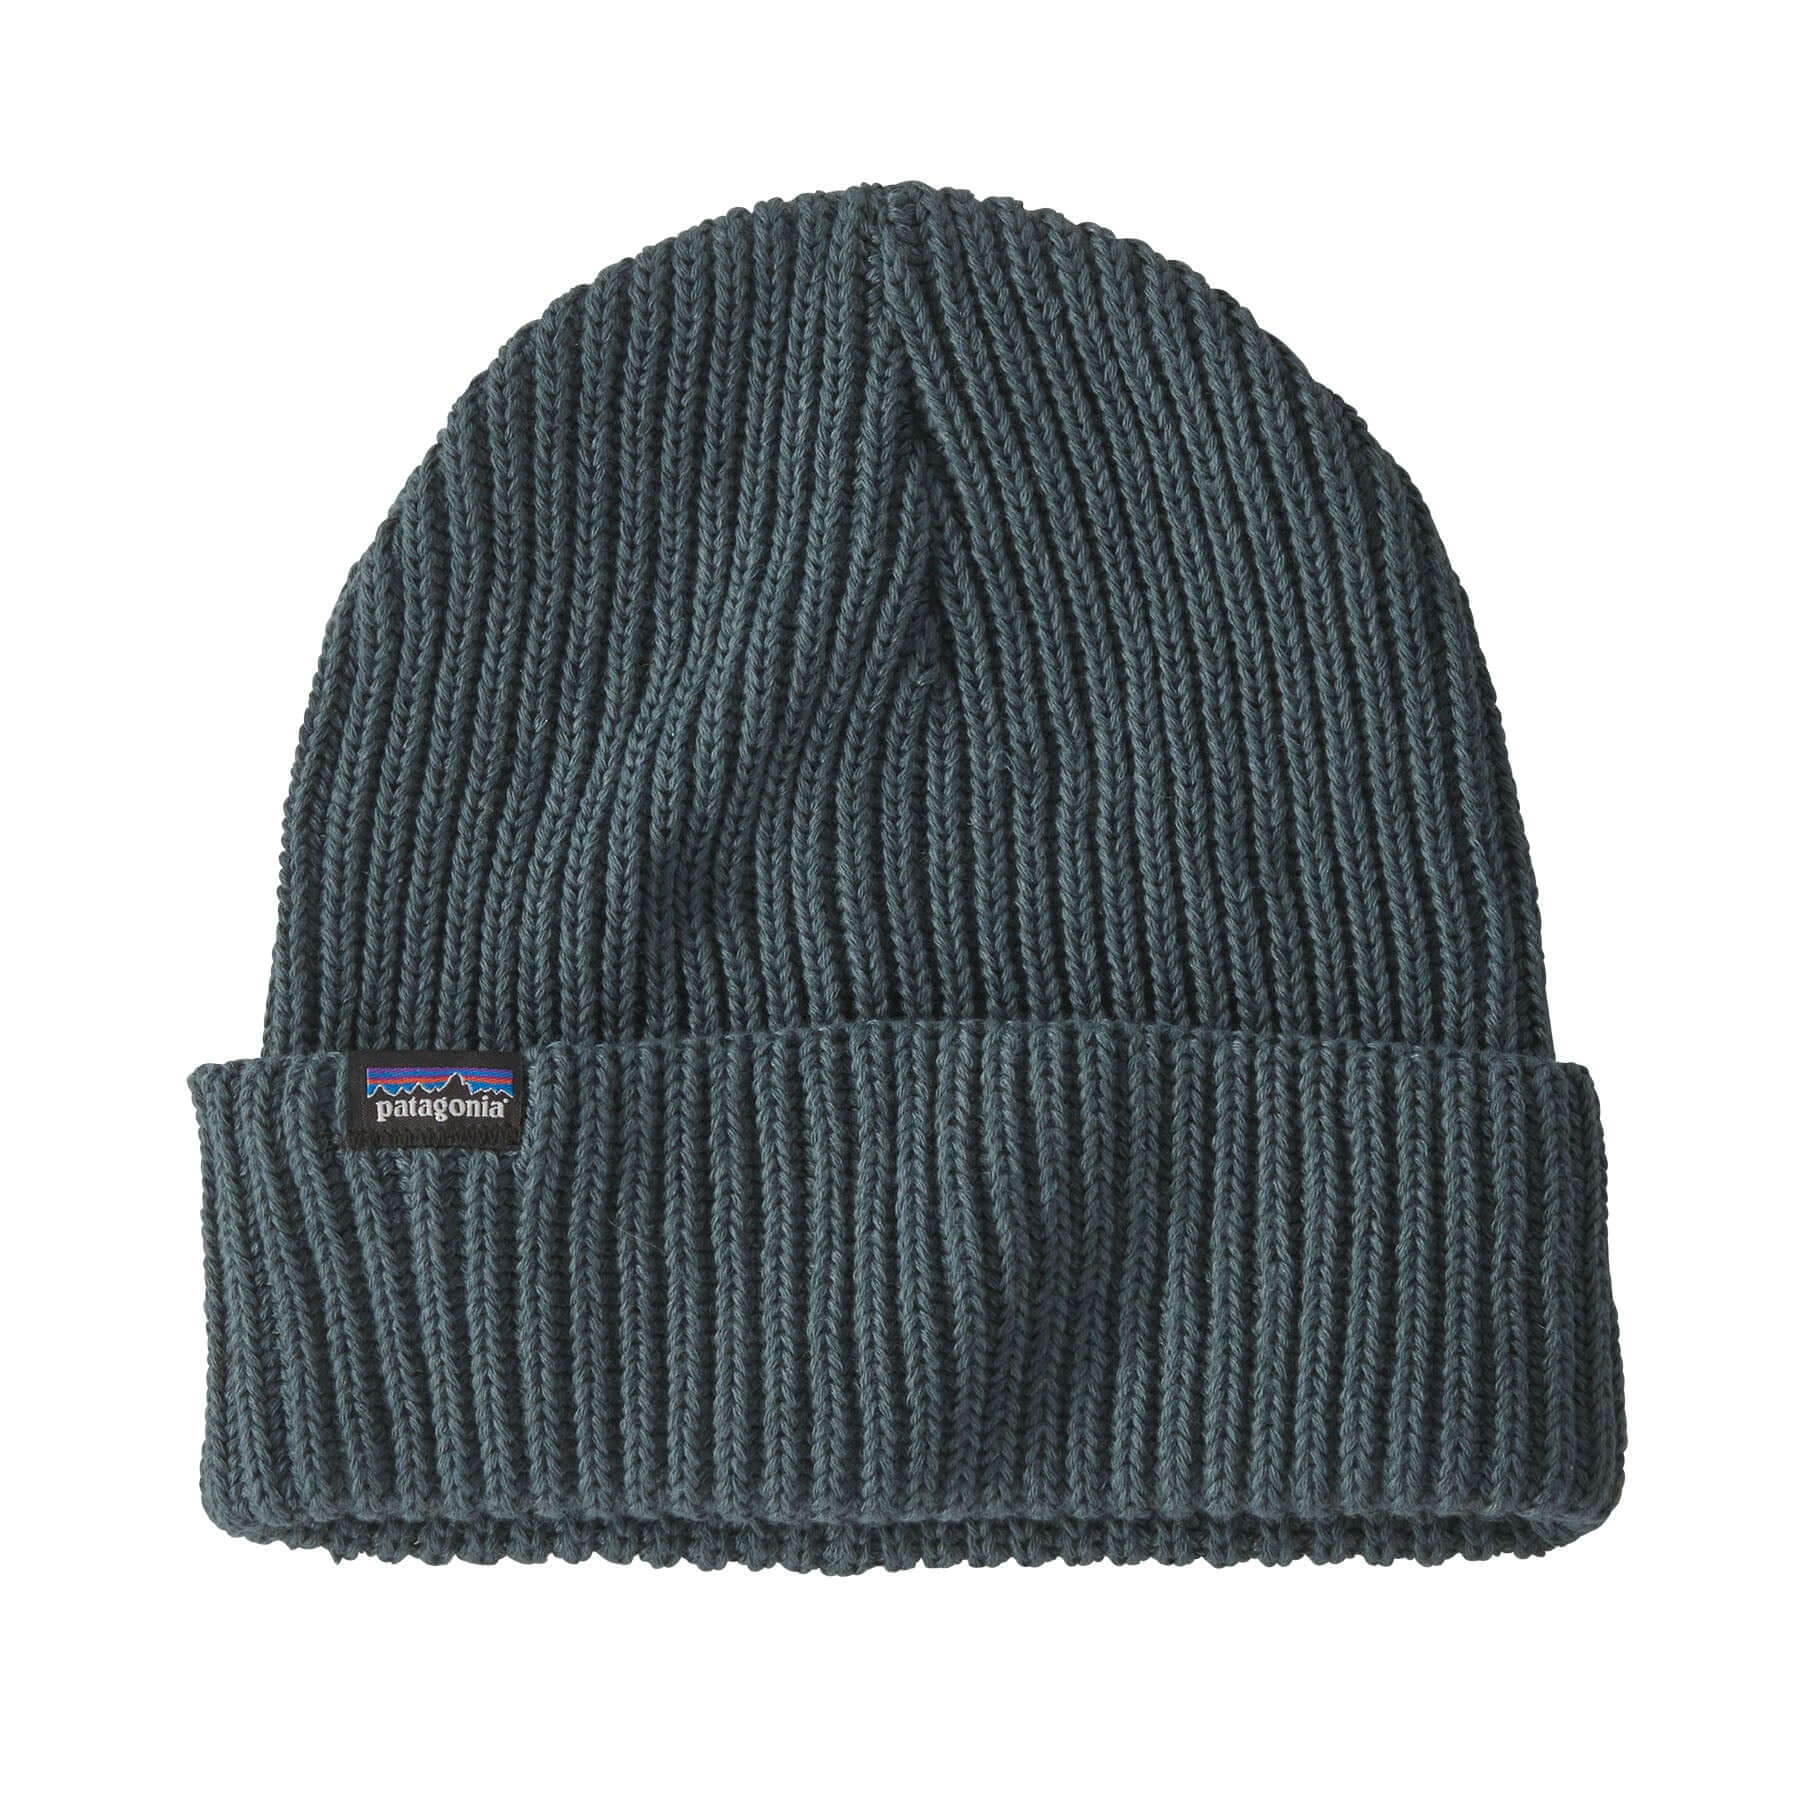 Fishermans Rolled Beanie in NOUVEAU GREEN | Patagonia Bend